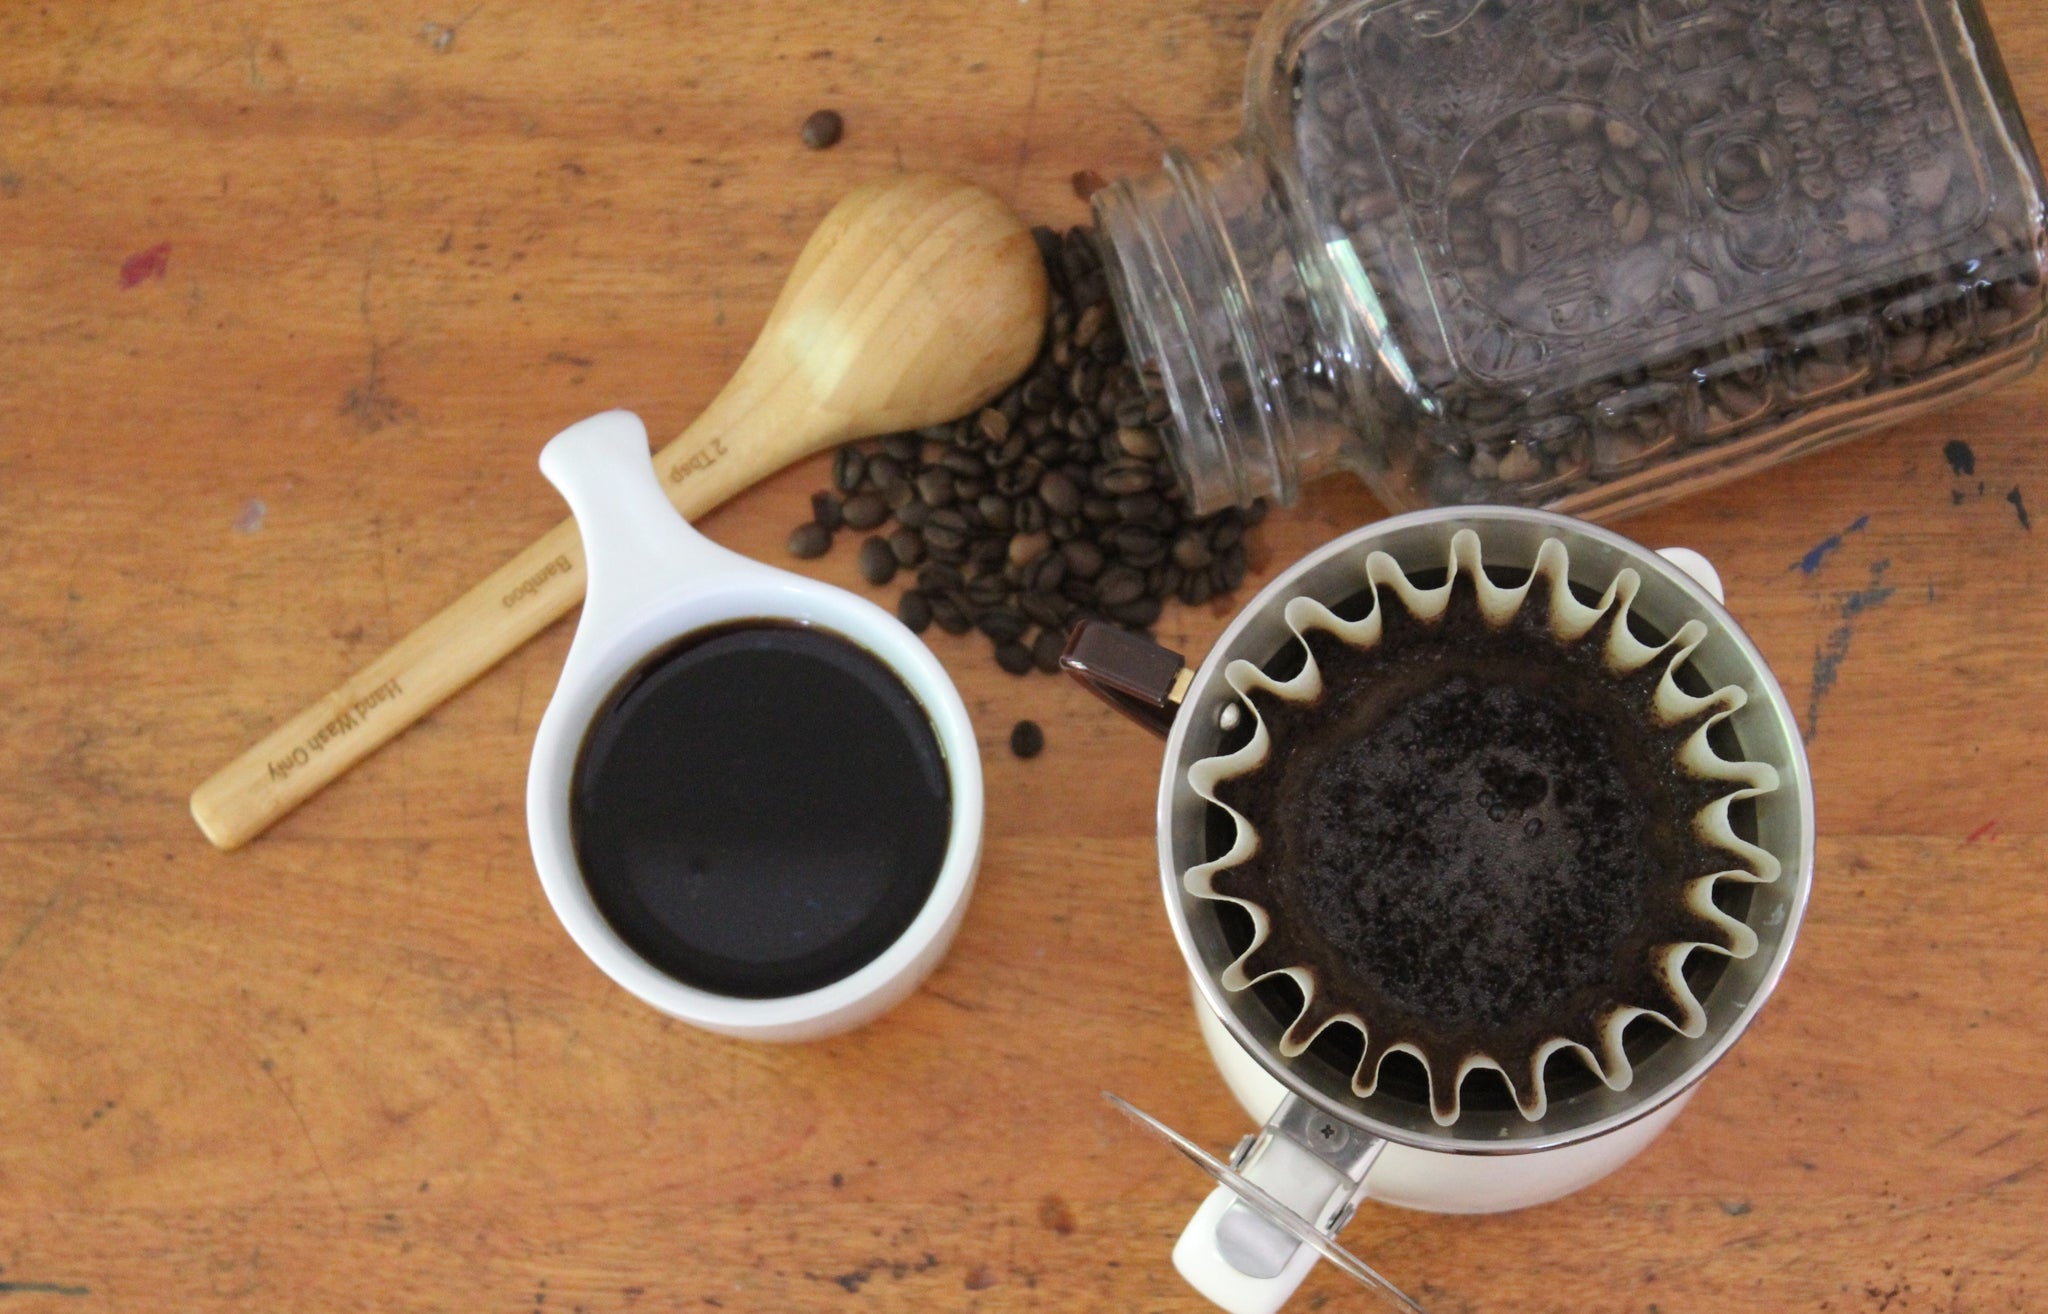 Coffee 101: Tips For Coffee Beginners